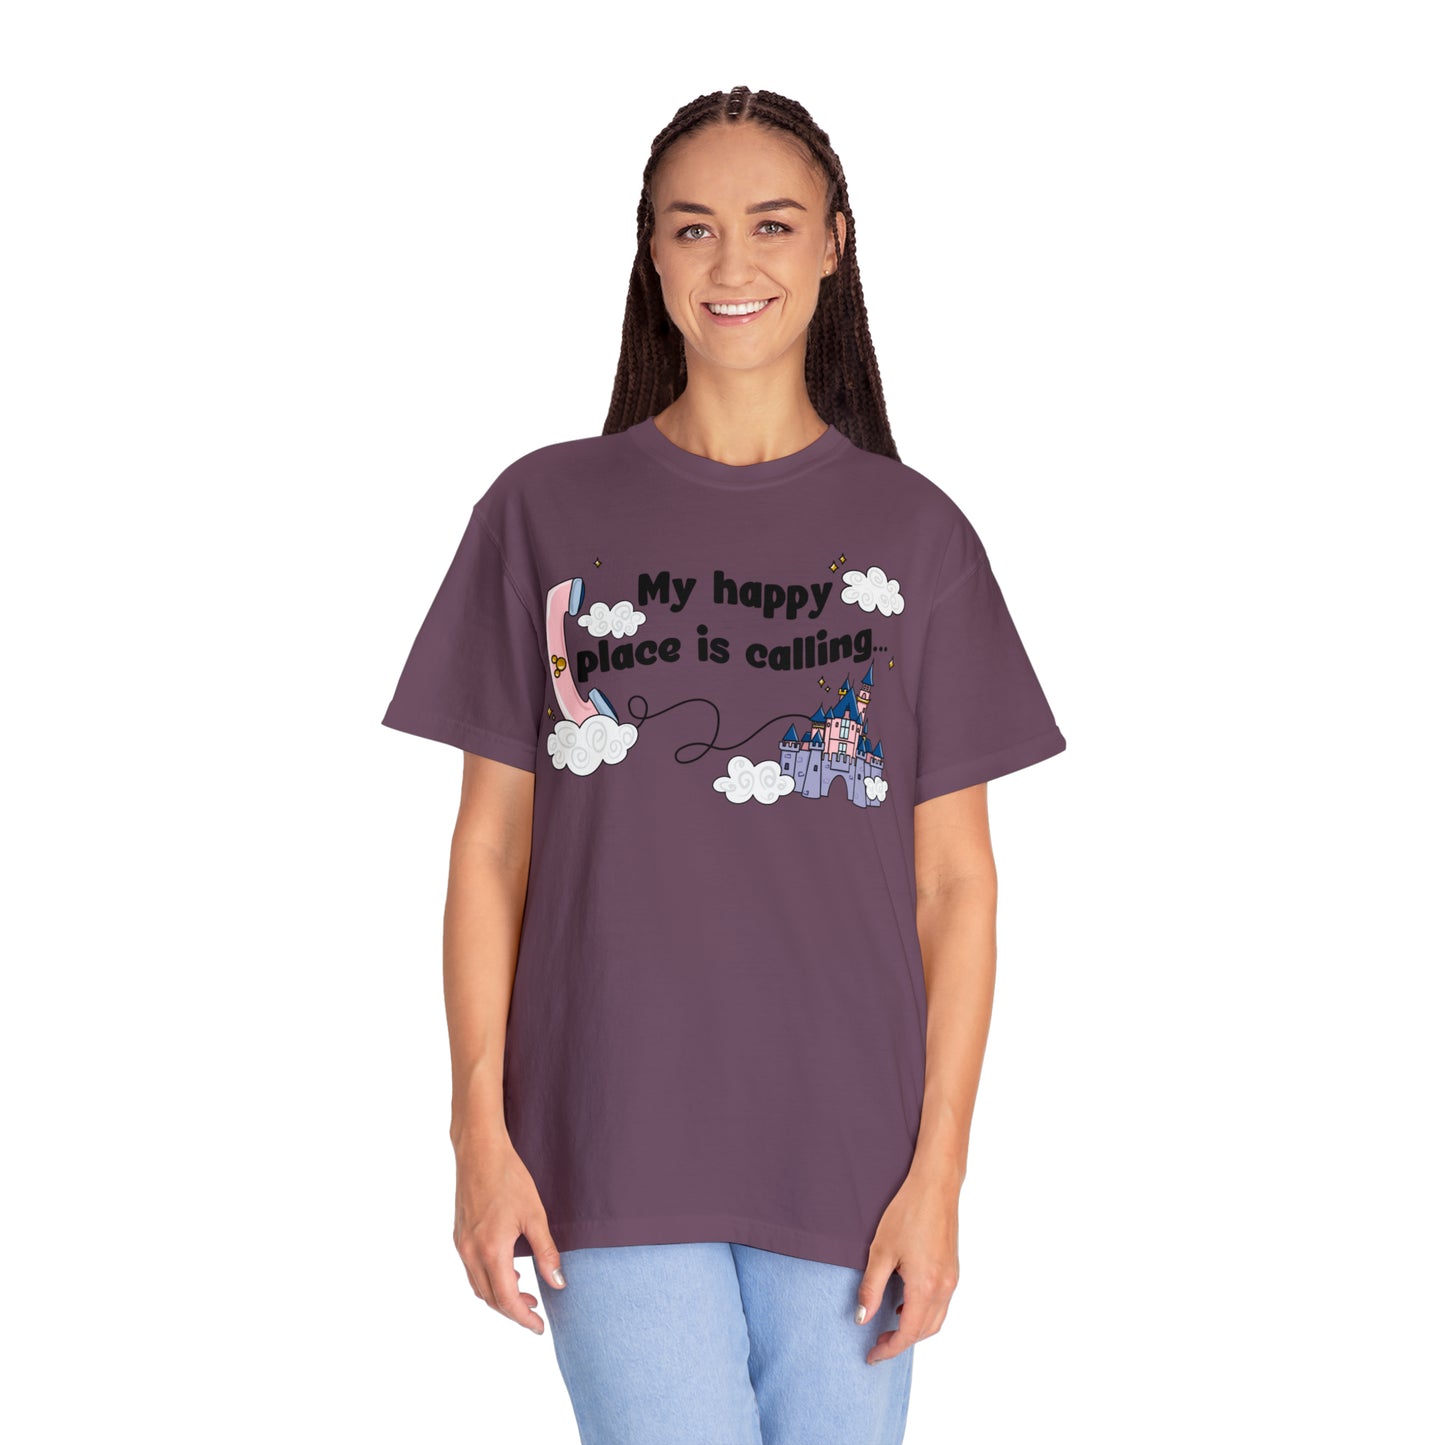 Adult Happy Place Calling, DL Tee - Comfort Colors